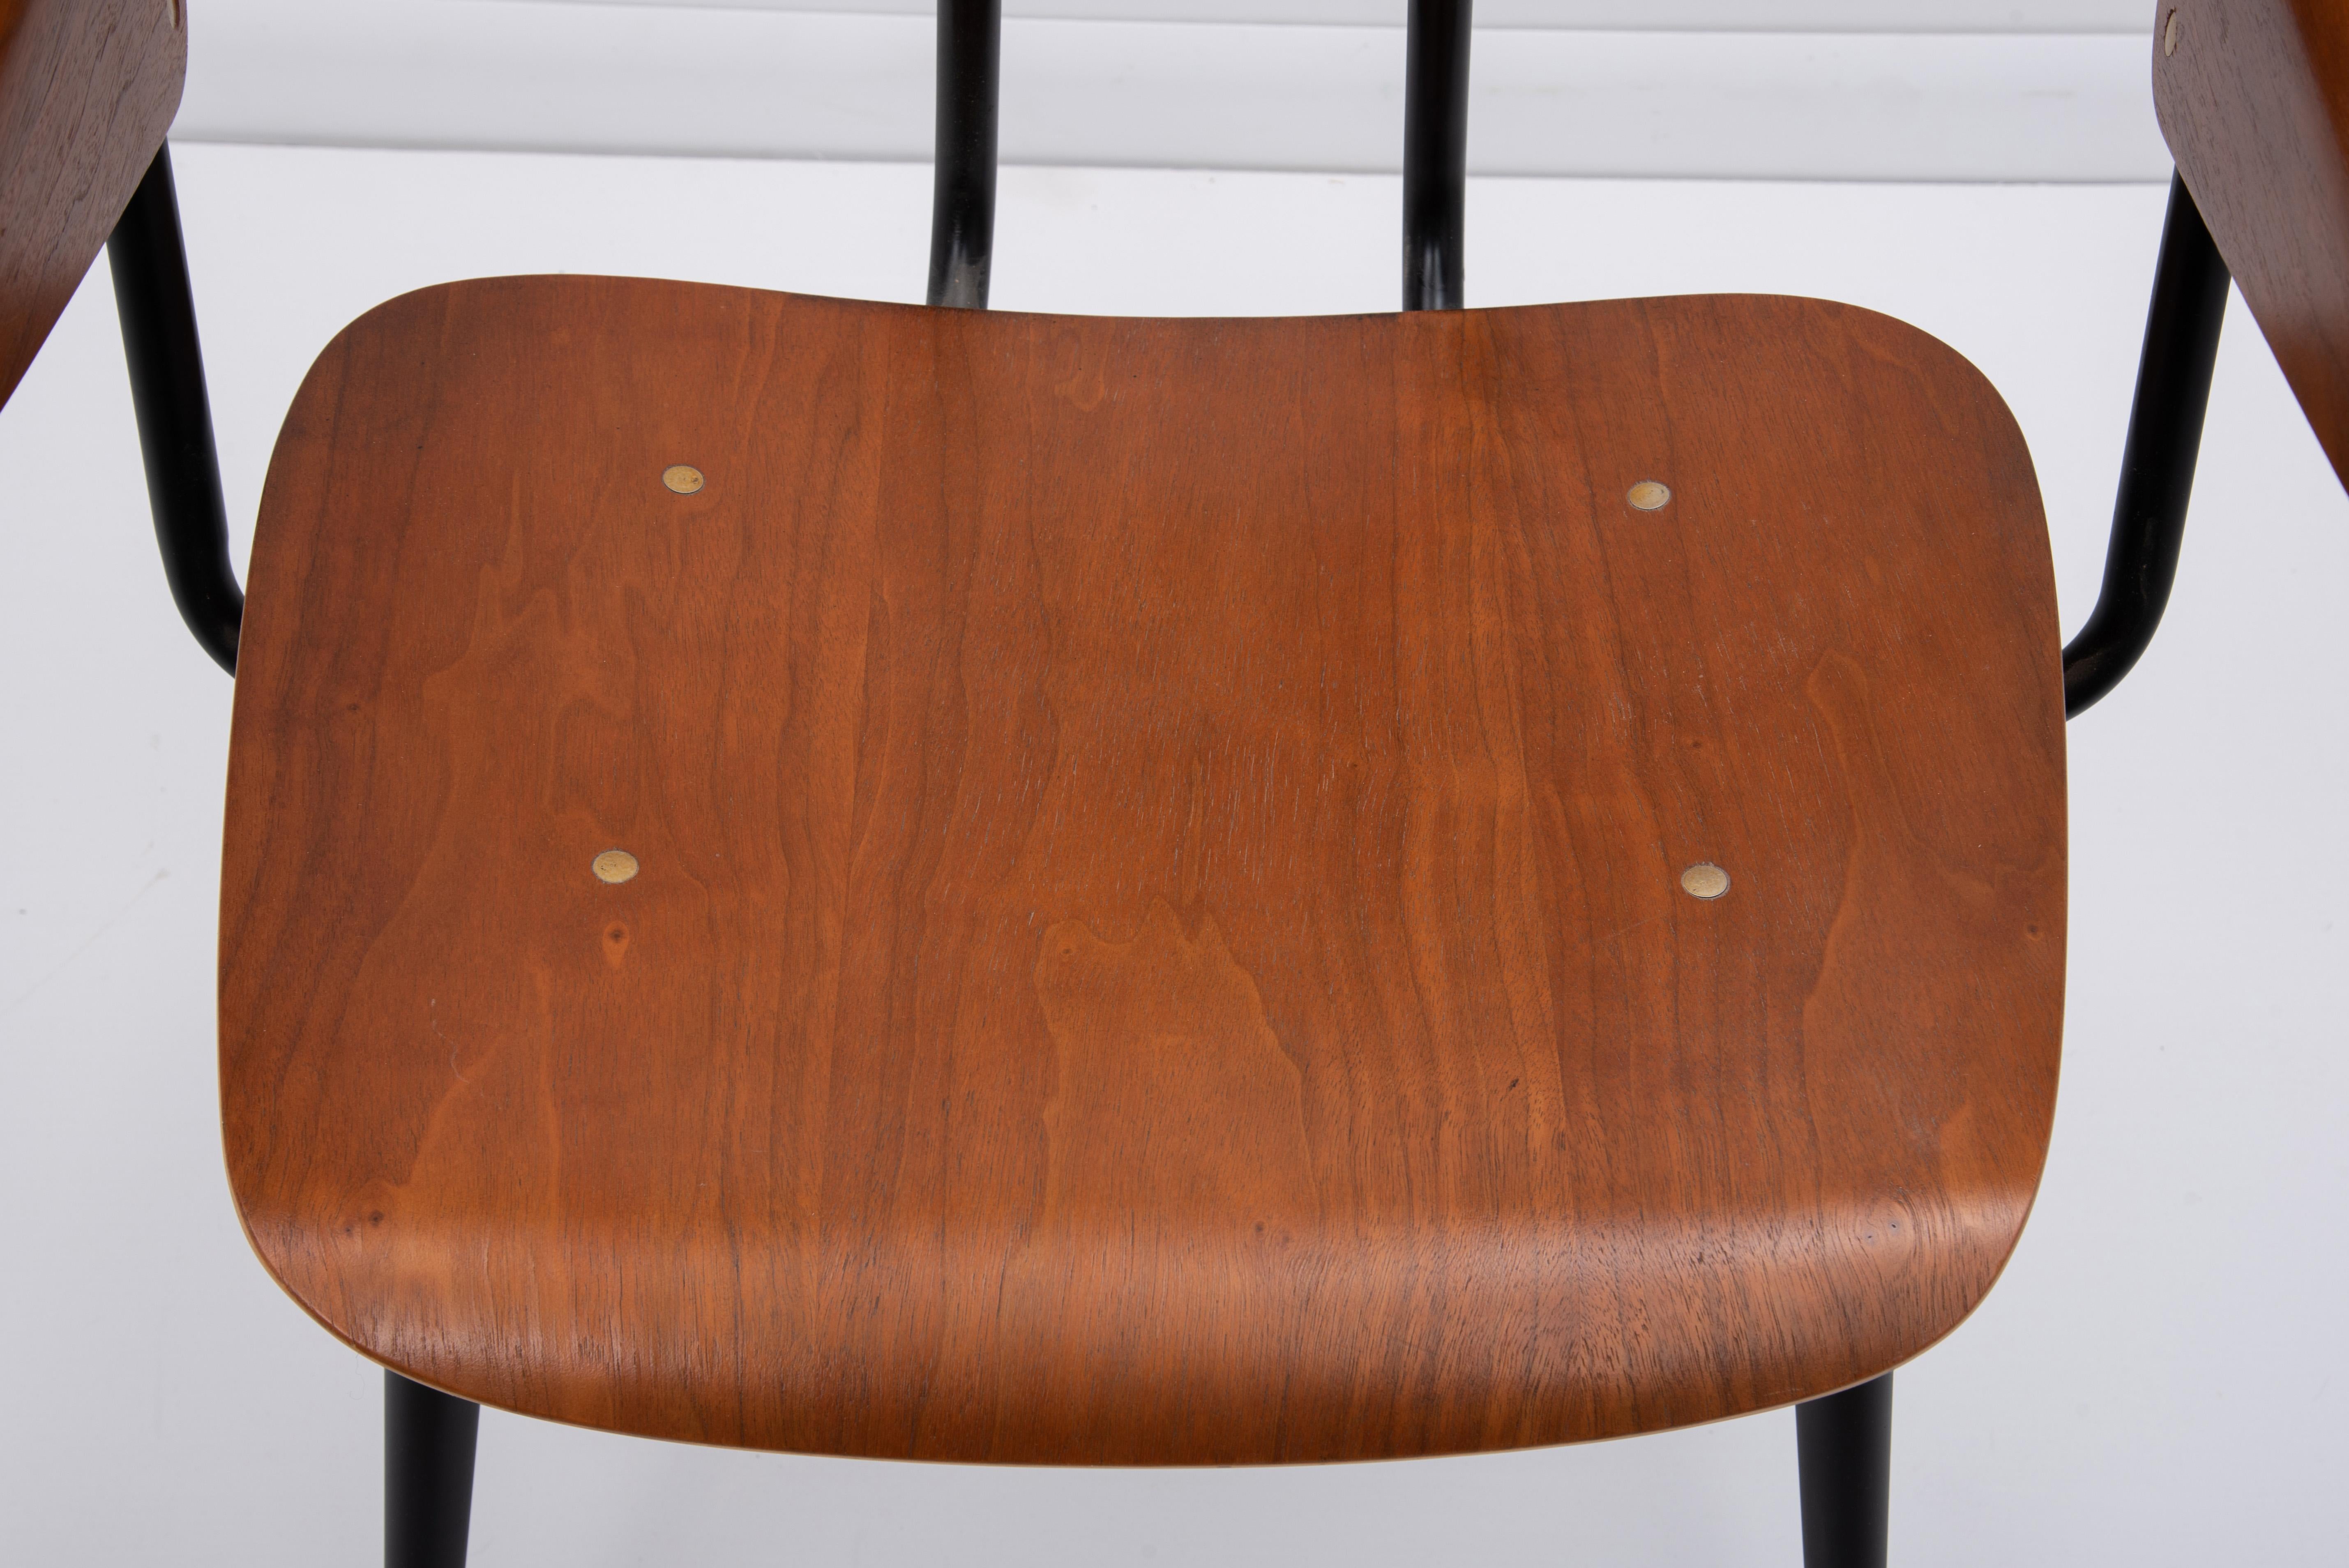 Walnut Brunswick Walnut Plywood Armchairs Eames DCW Jean Prouve - a Set of 4 For Sale 5